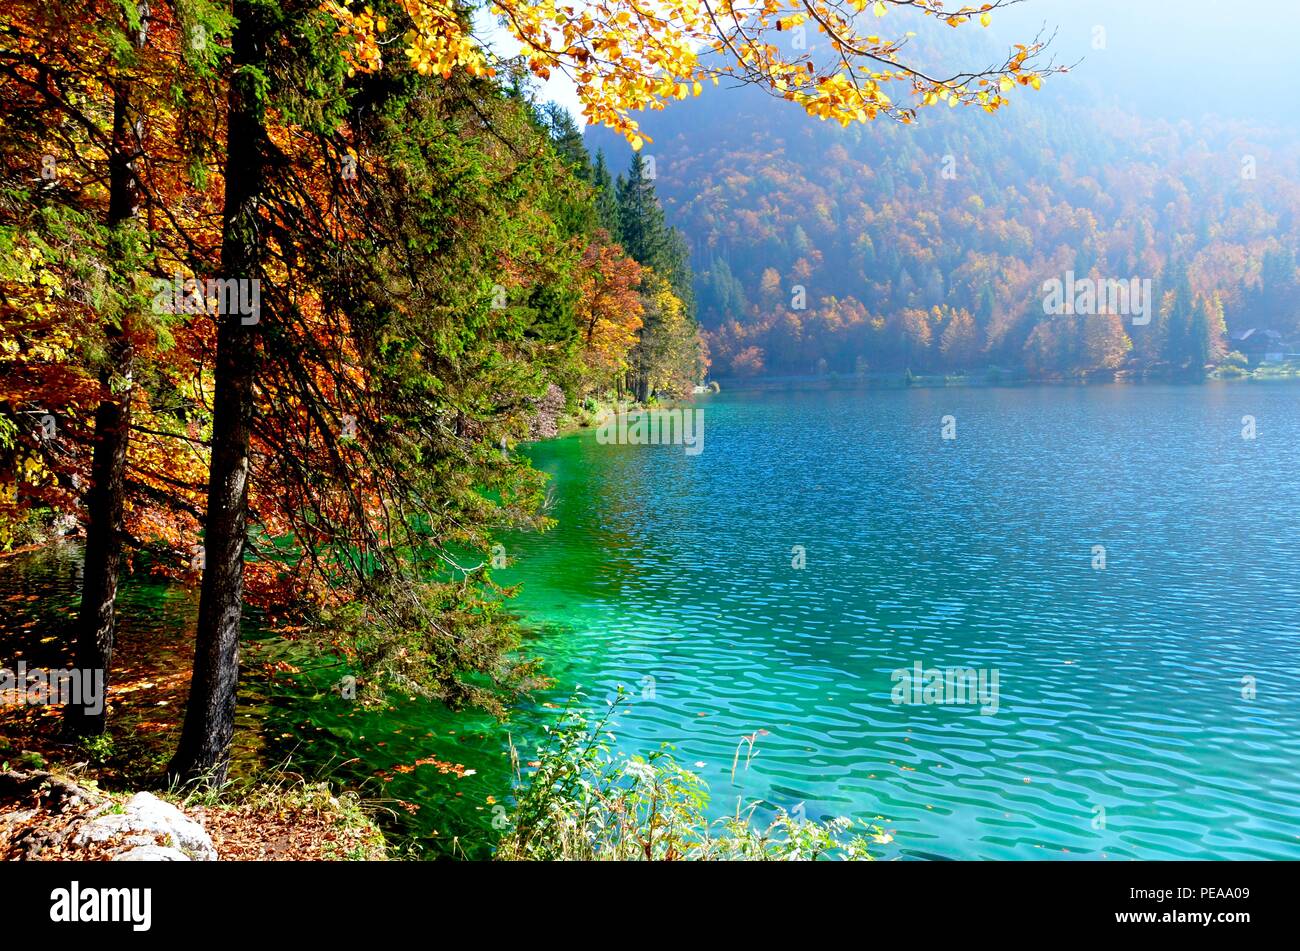 Lakes Laghi di Fusine in Italy in autumn, Slovenia border, indian summer, reflections in water, outdoor activities, hiking trails,fall foliage, sunny Stock Photo